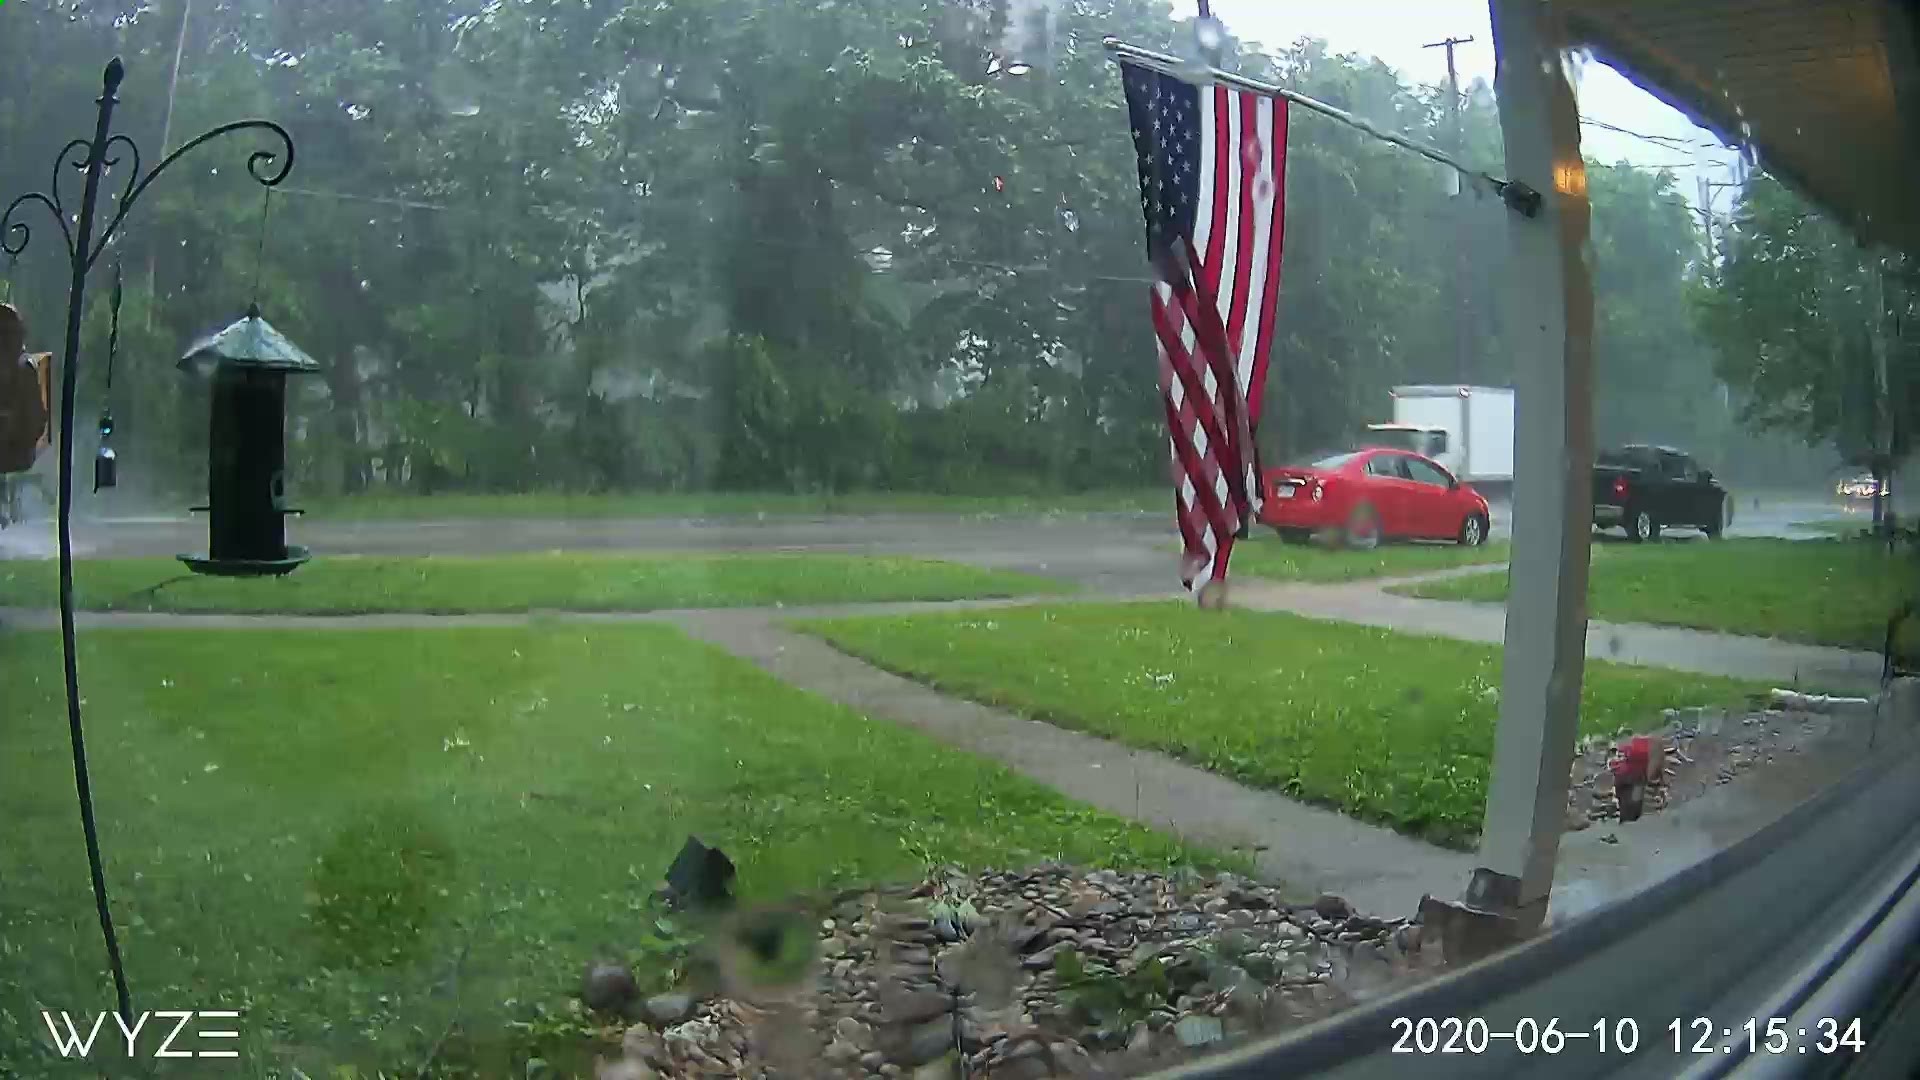 Over 70,000 Consumer Energy customers in Michigan are without power as storms sweep through the state. This video shows a lightning strike in Northeast Grand Rapids